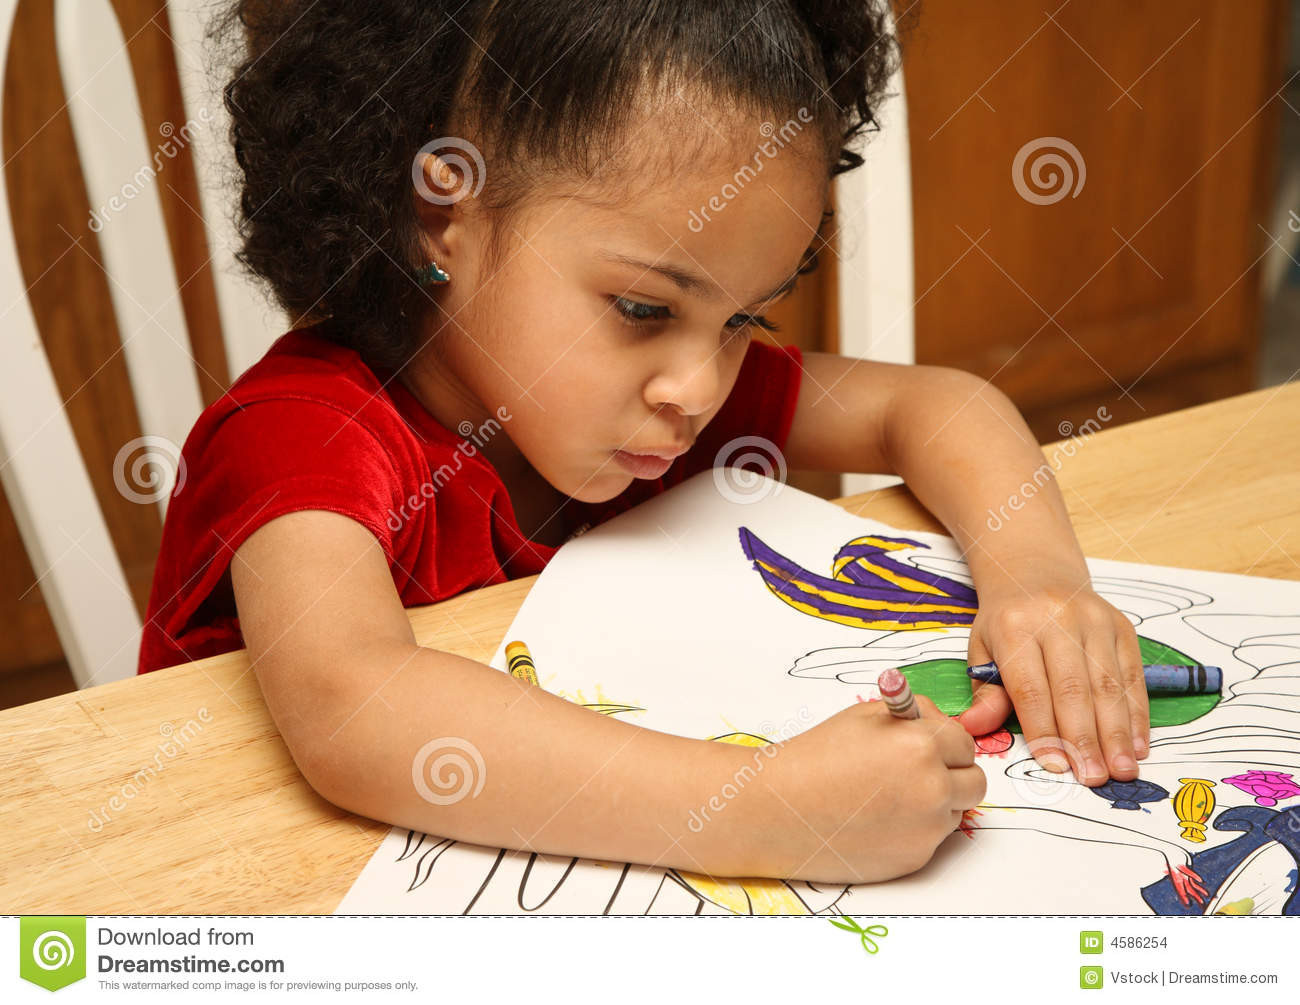 Children Coloring
 Child Coloring Stock Image